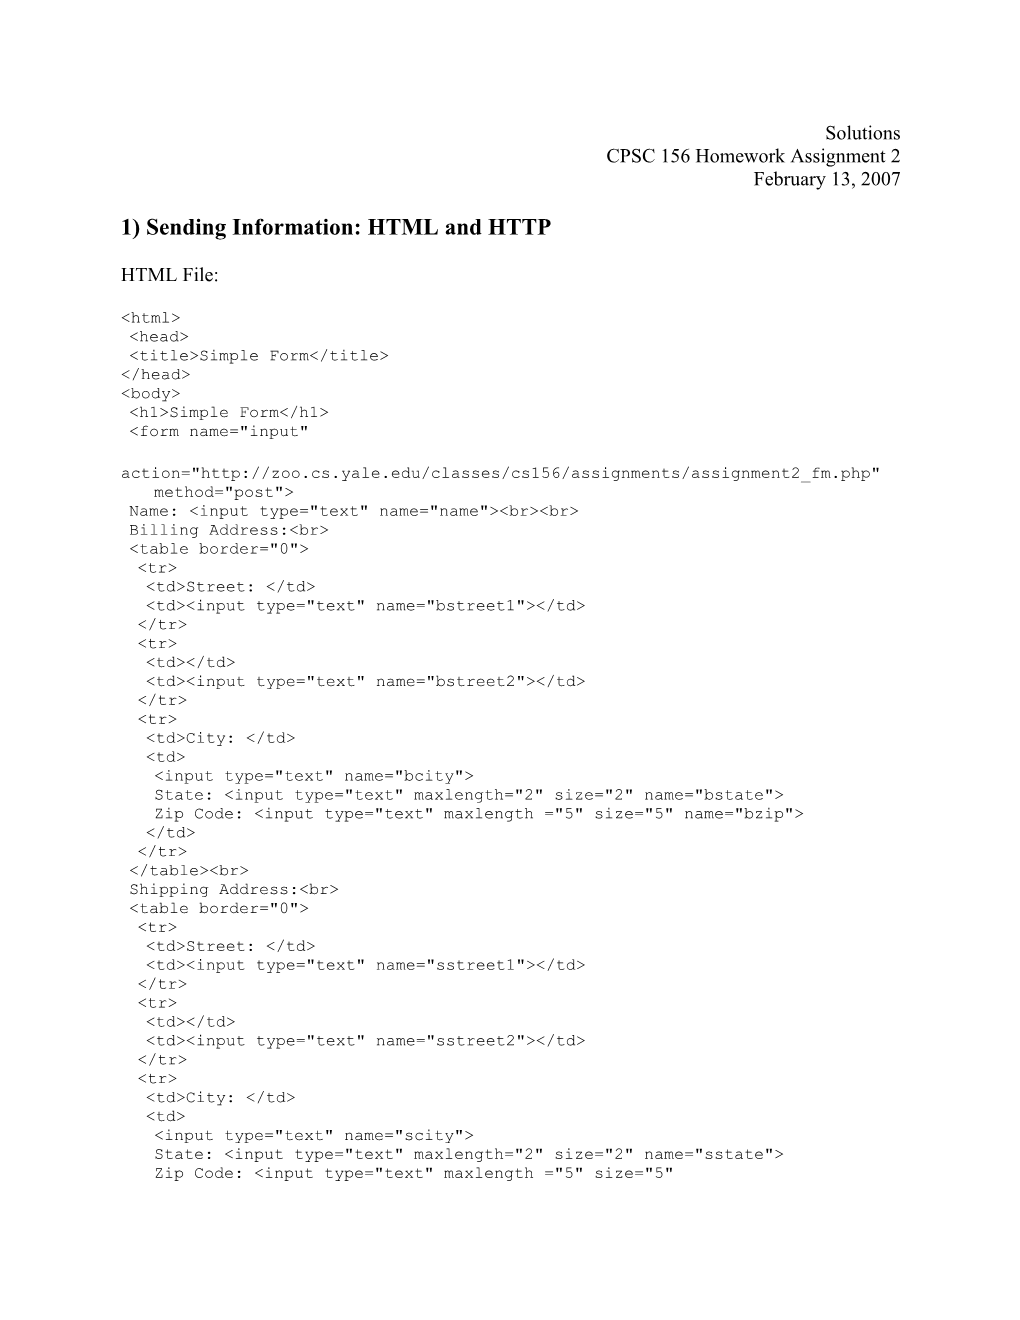 1) Sending Information: HTML and HTTP